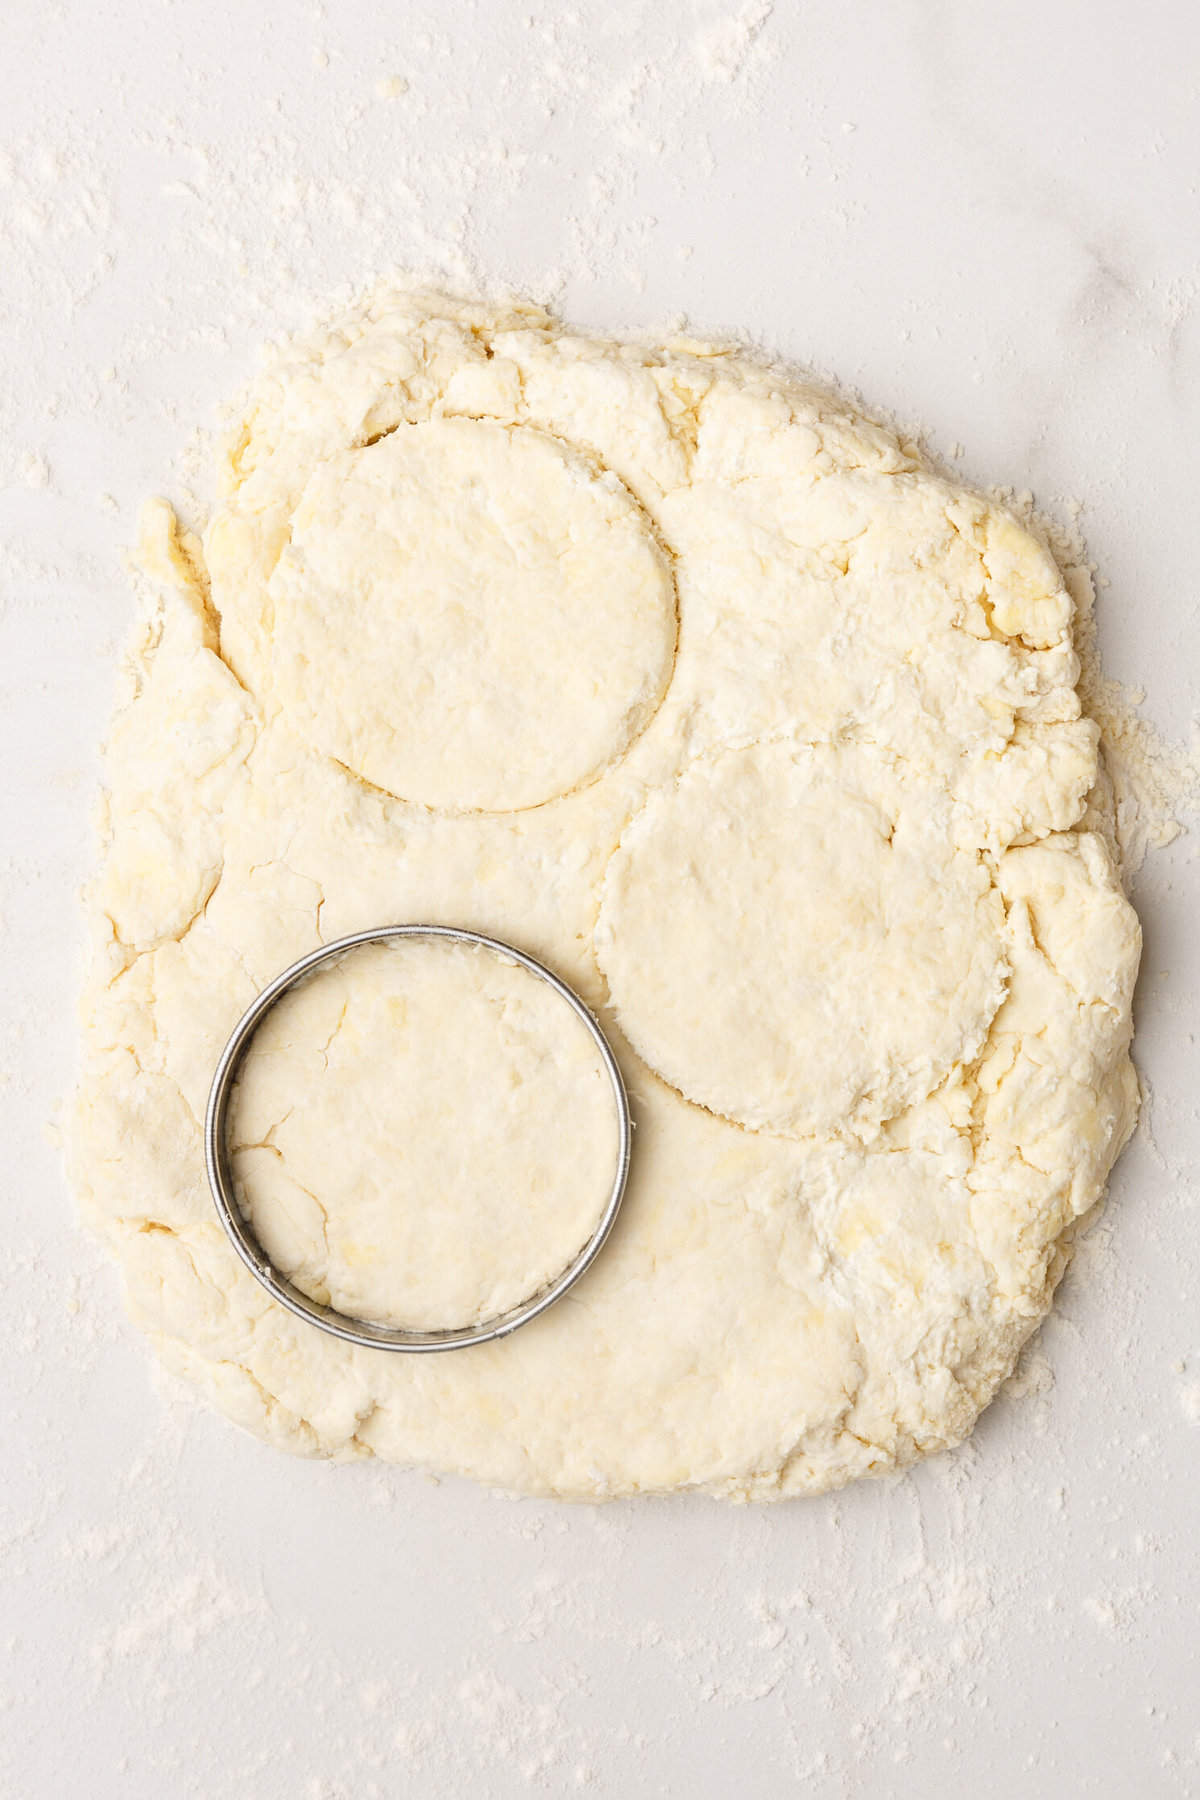 top down image of homemade Popeyes biscuit dough being cut with a circle cookie cutter.